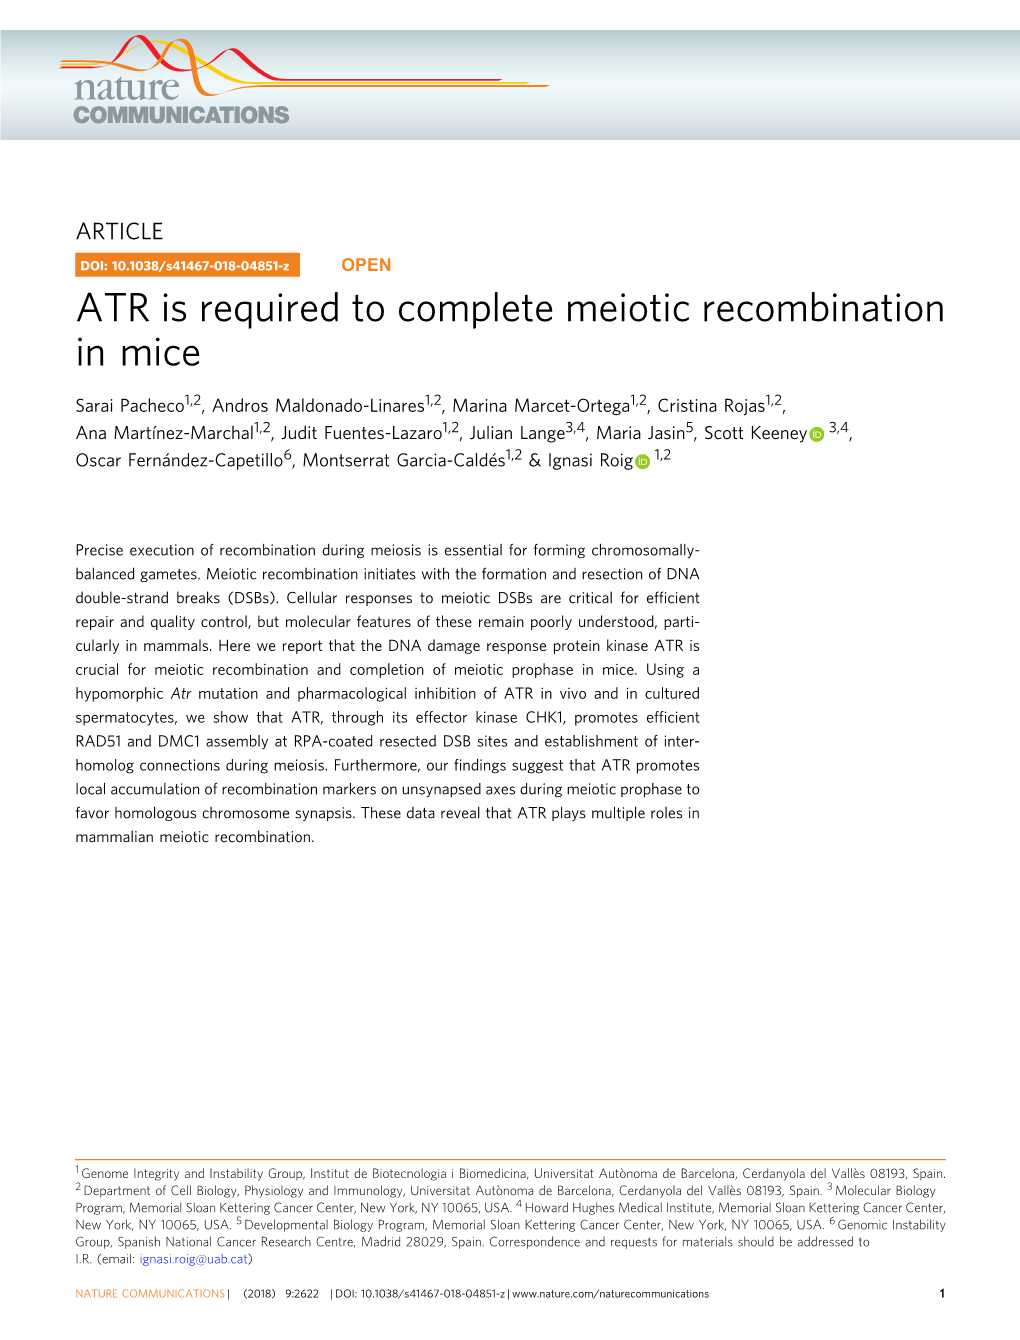 ATR Is Required to Complete Meiotic Recombination in Mice